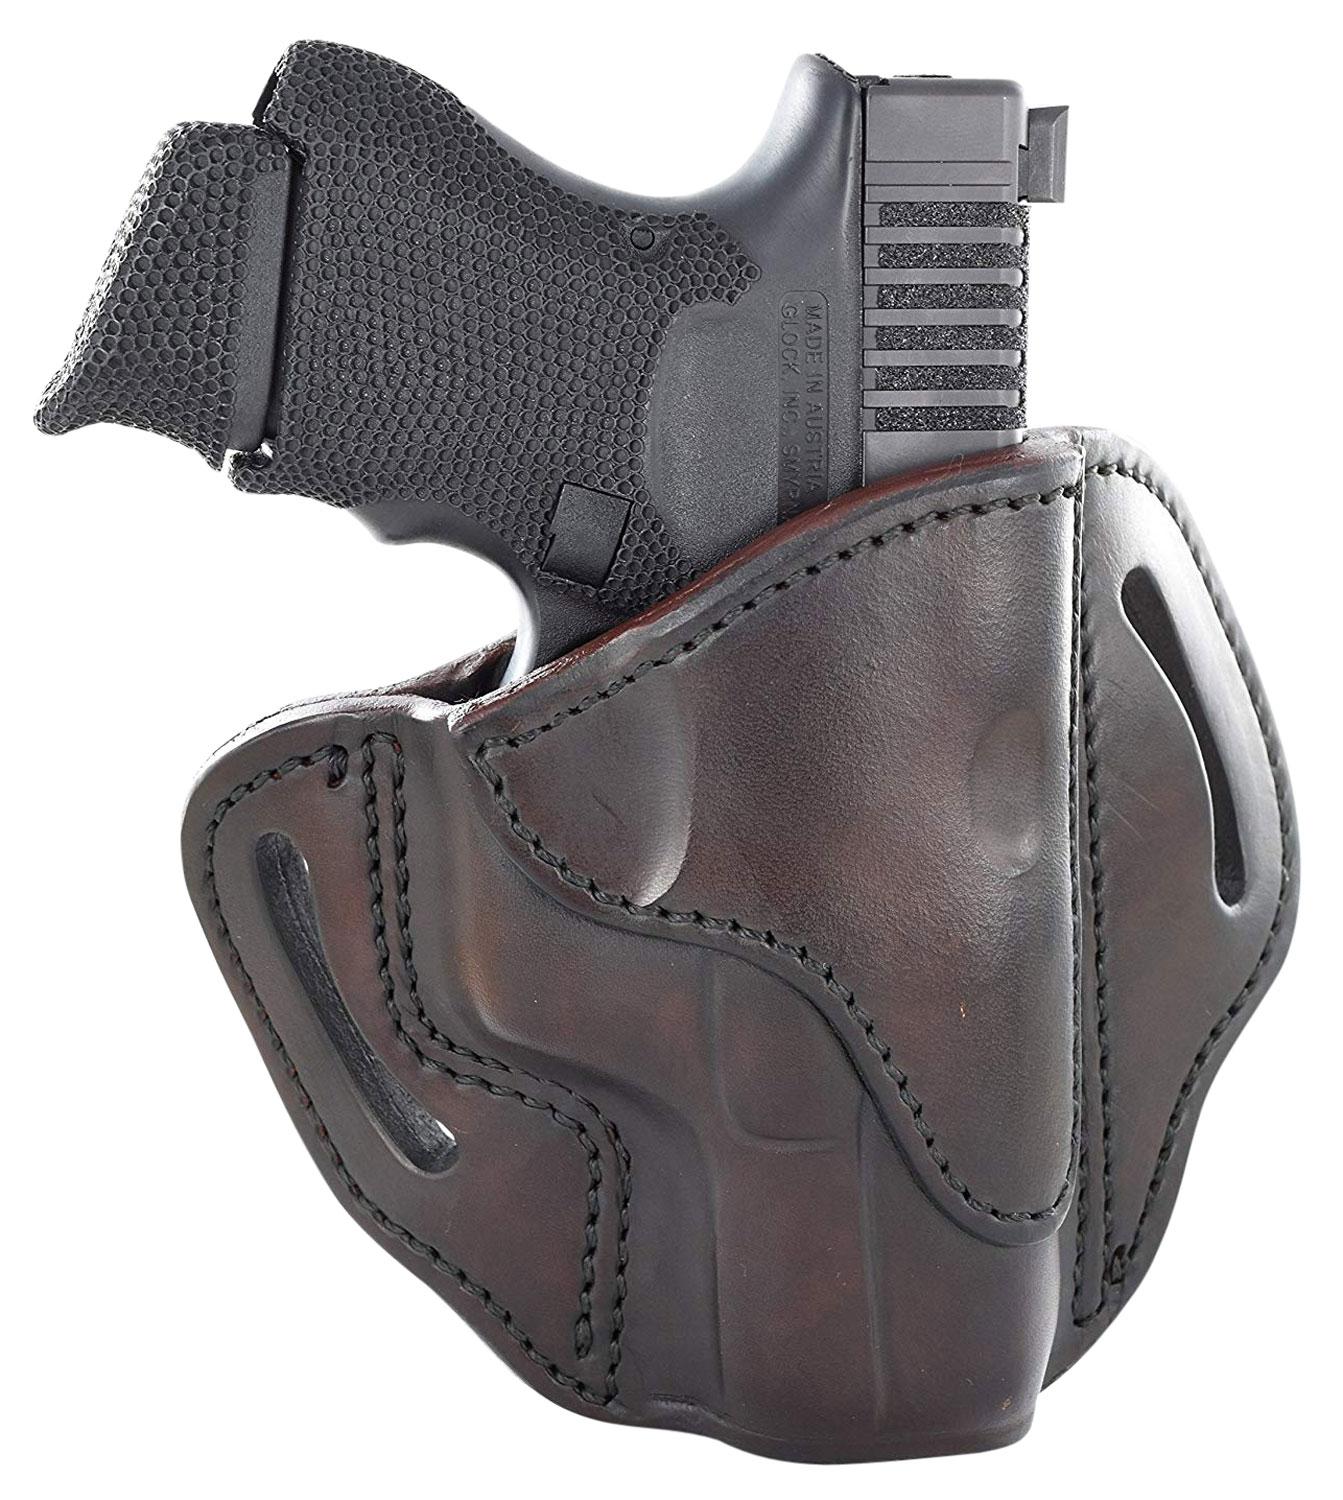  1791 Bh2.1 Holster Right Hand One Size